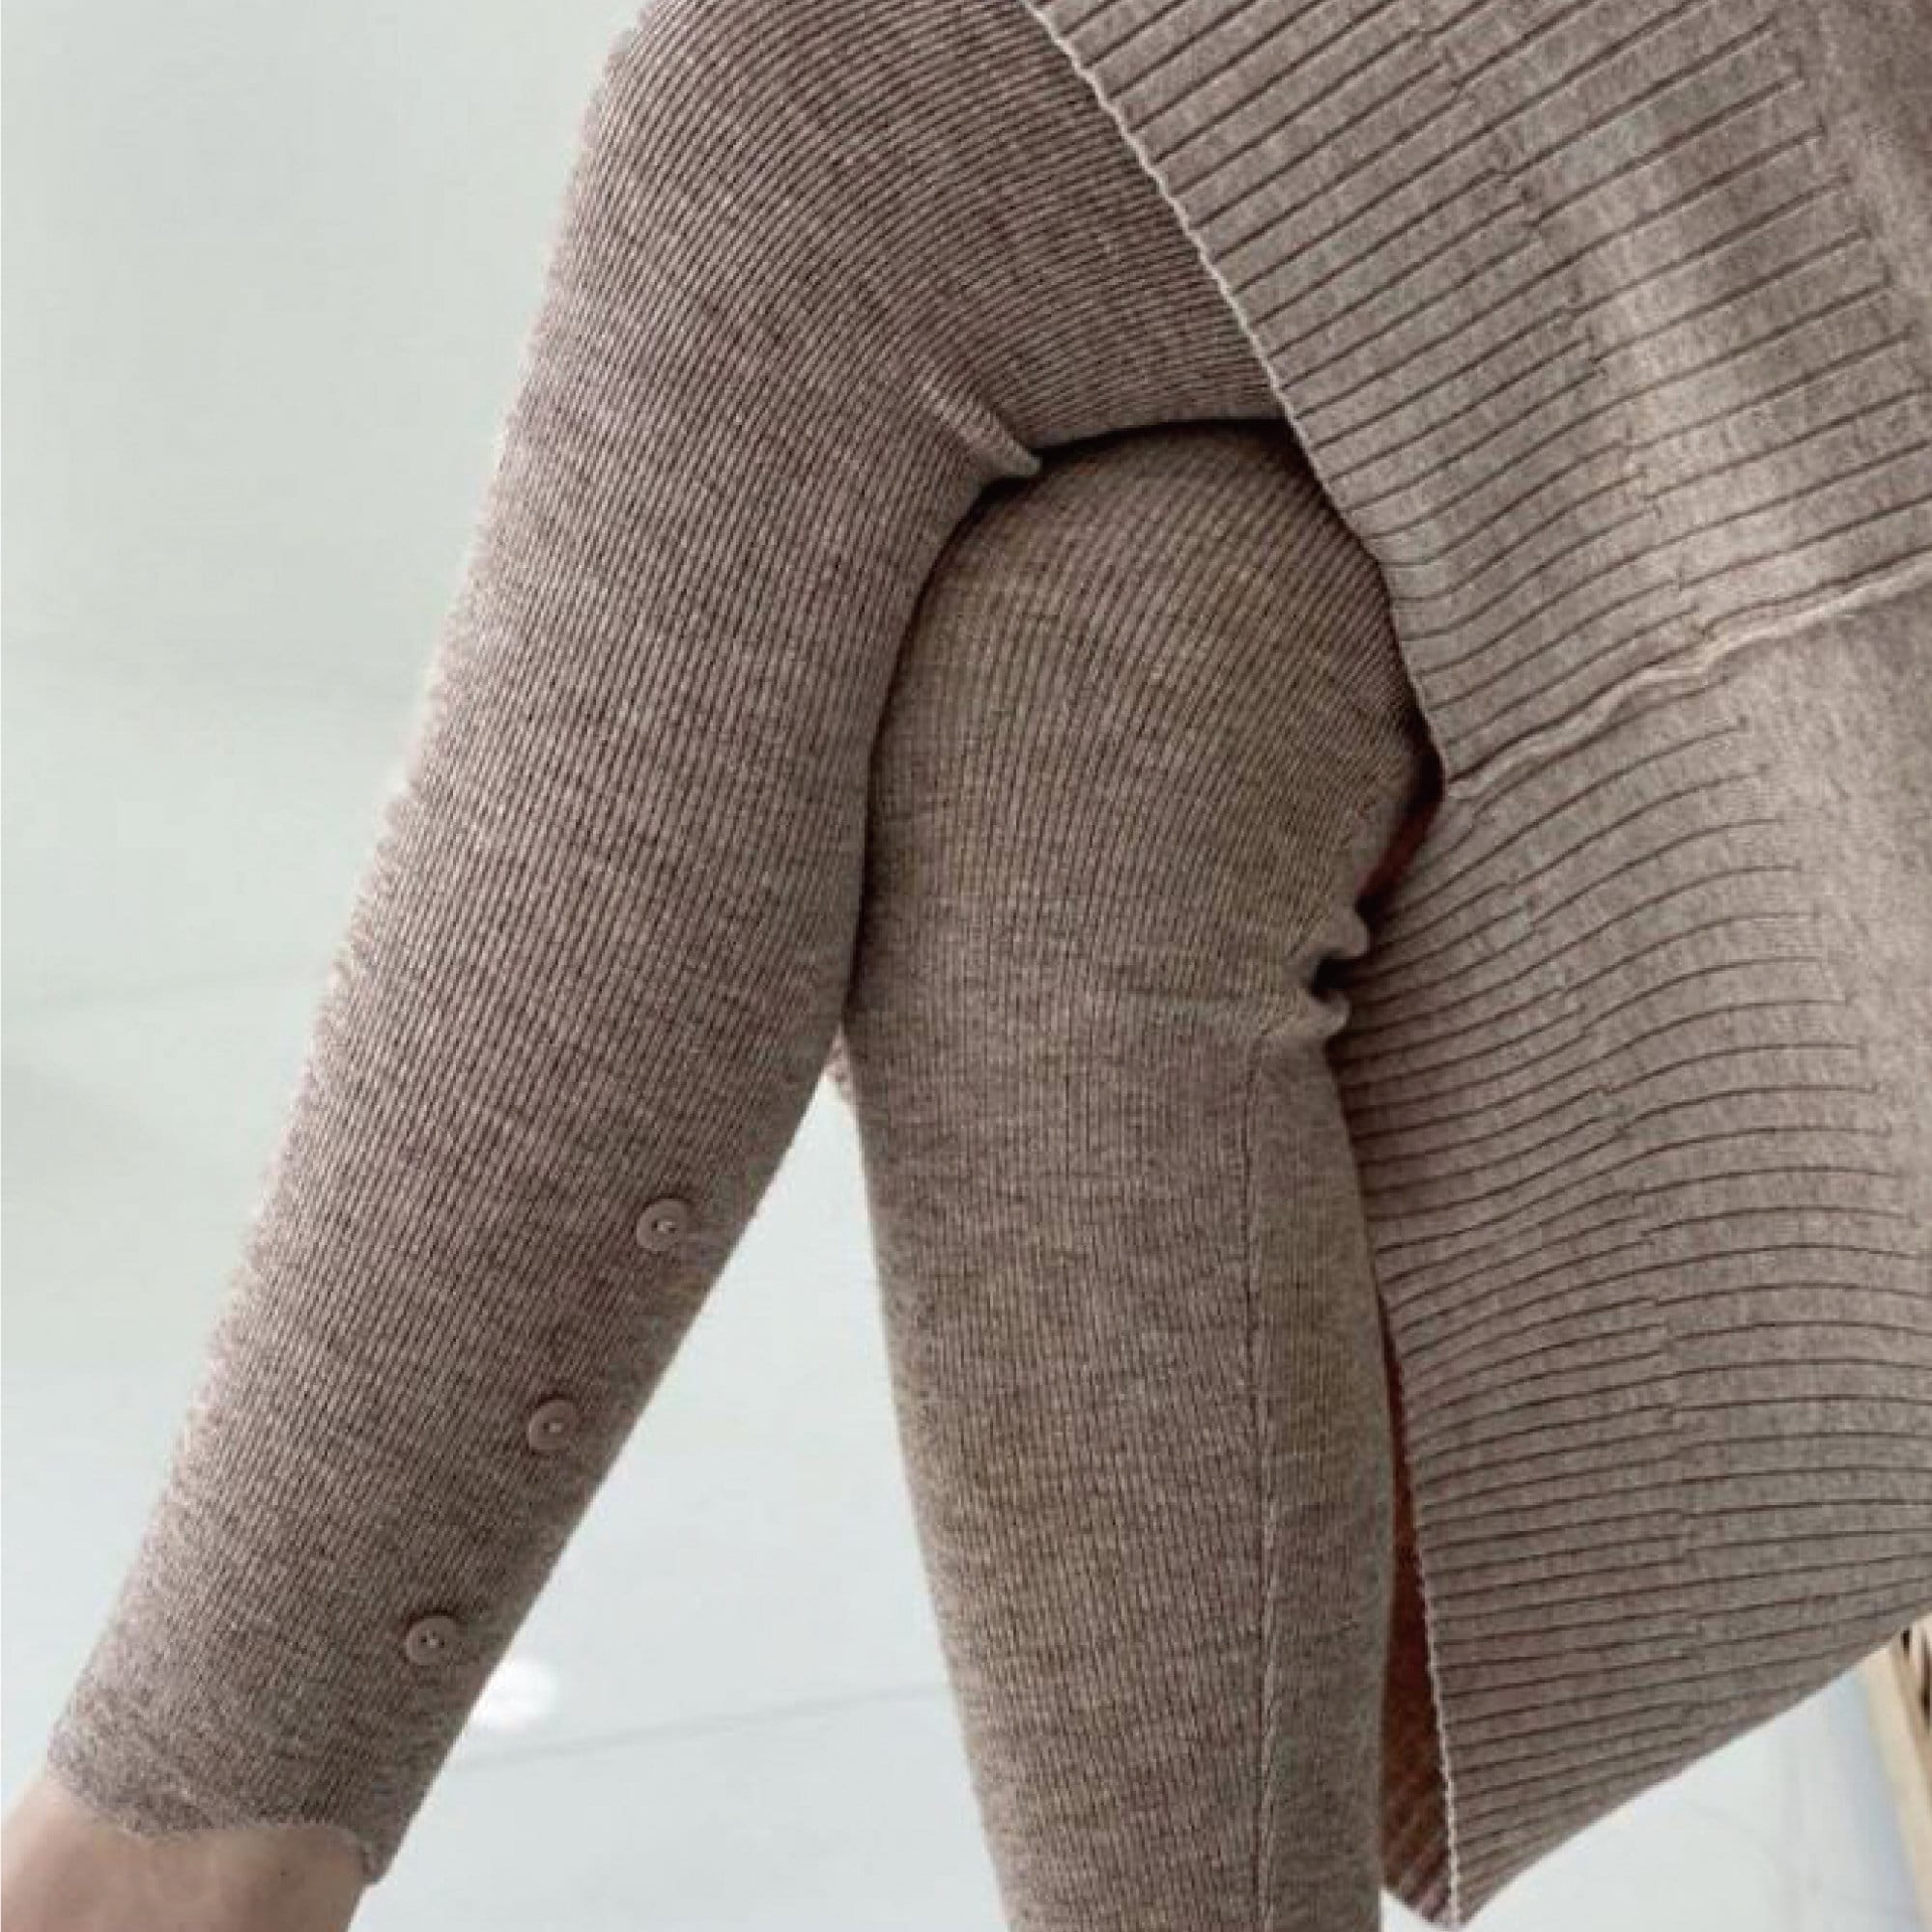 Cashmere Blended Wool Leggings / Leggings for Women / Extra Soft  Stretchable Leggings / Cashmere Knit Tights / Sweater Knit Leggings -   Canada